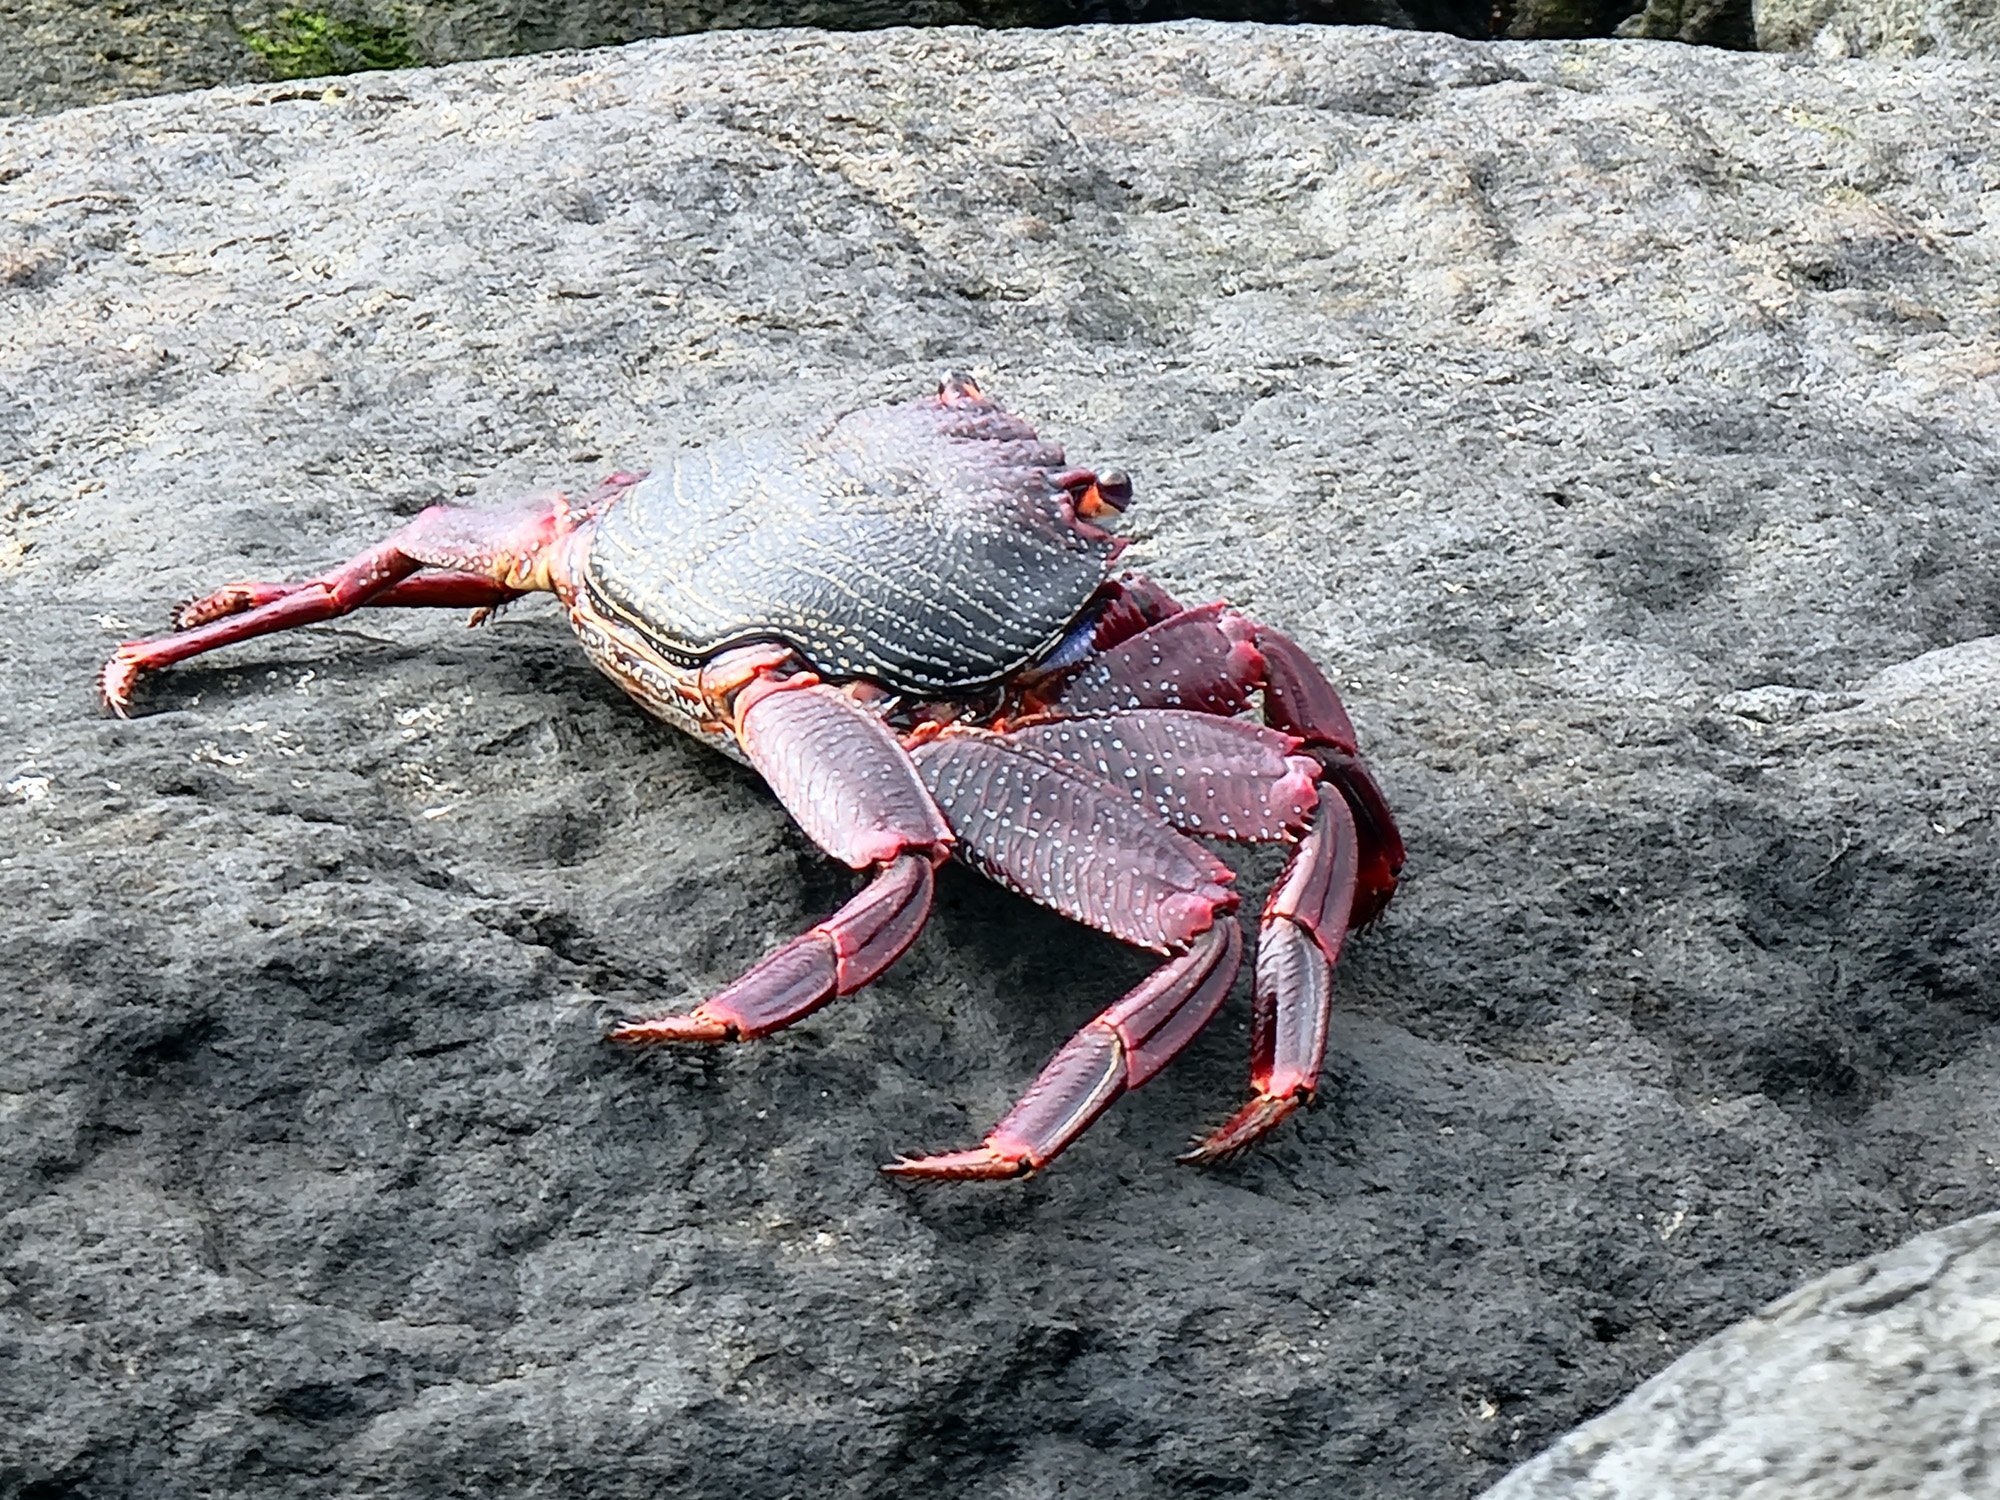 Tons of little crabs hanging out on the rocks in the harbor.